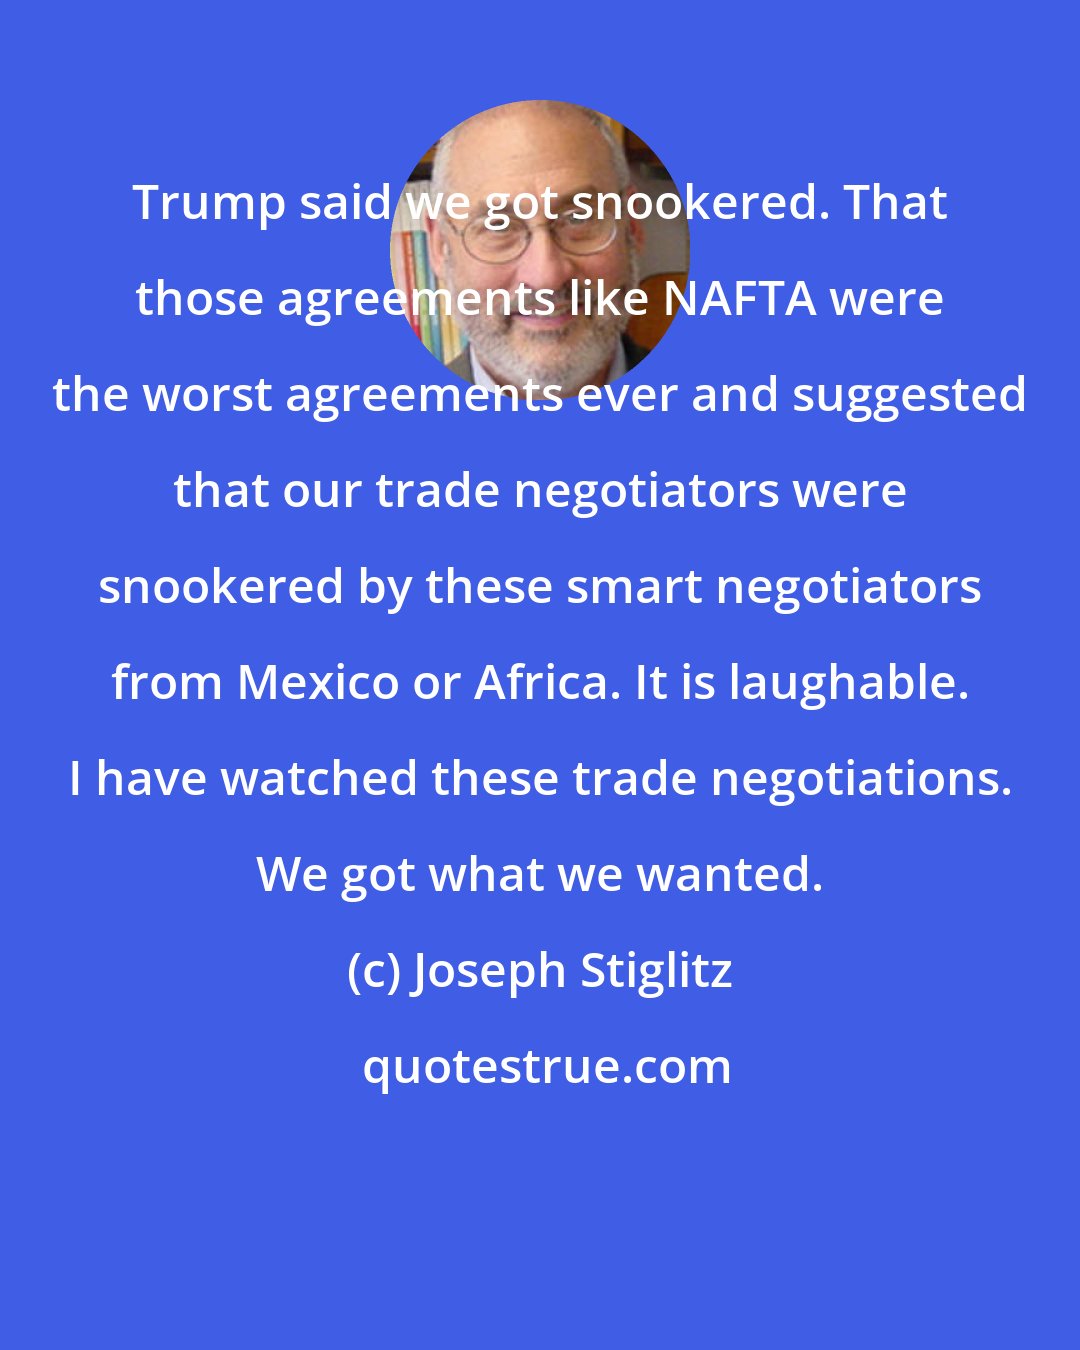 Joseph Stiglitz: Trump said we got snookered. That those agreements like NAFTA were the worst agreements ever and suggested that our trade negotiators were snookered by these smart negotiators from Mexico or Africa. It is laughable. I have watched these trade negotiations. We got what we wanted.